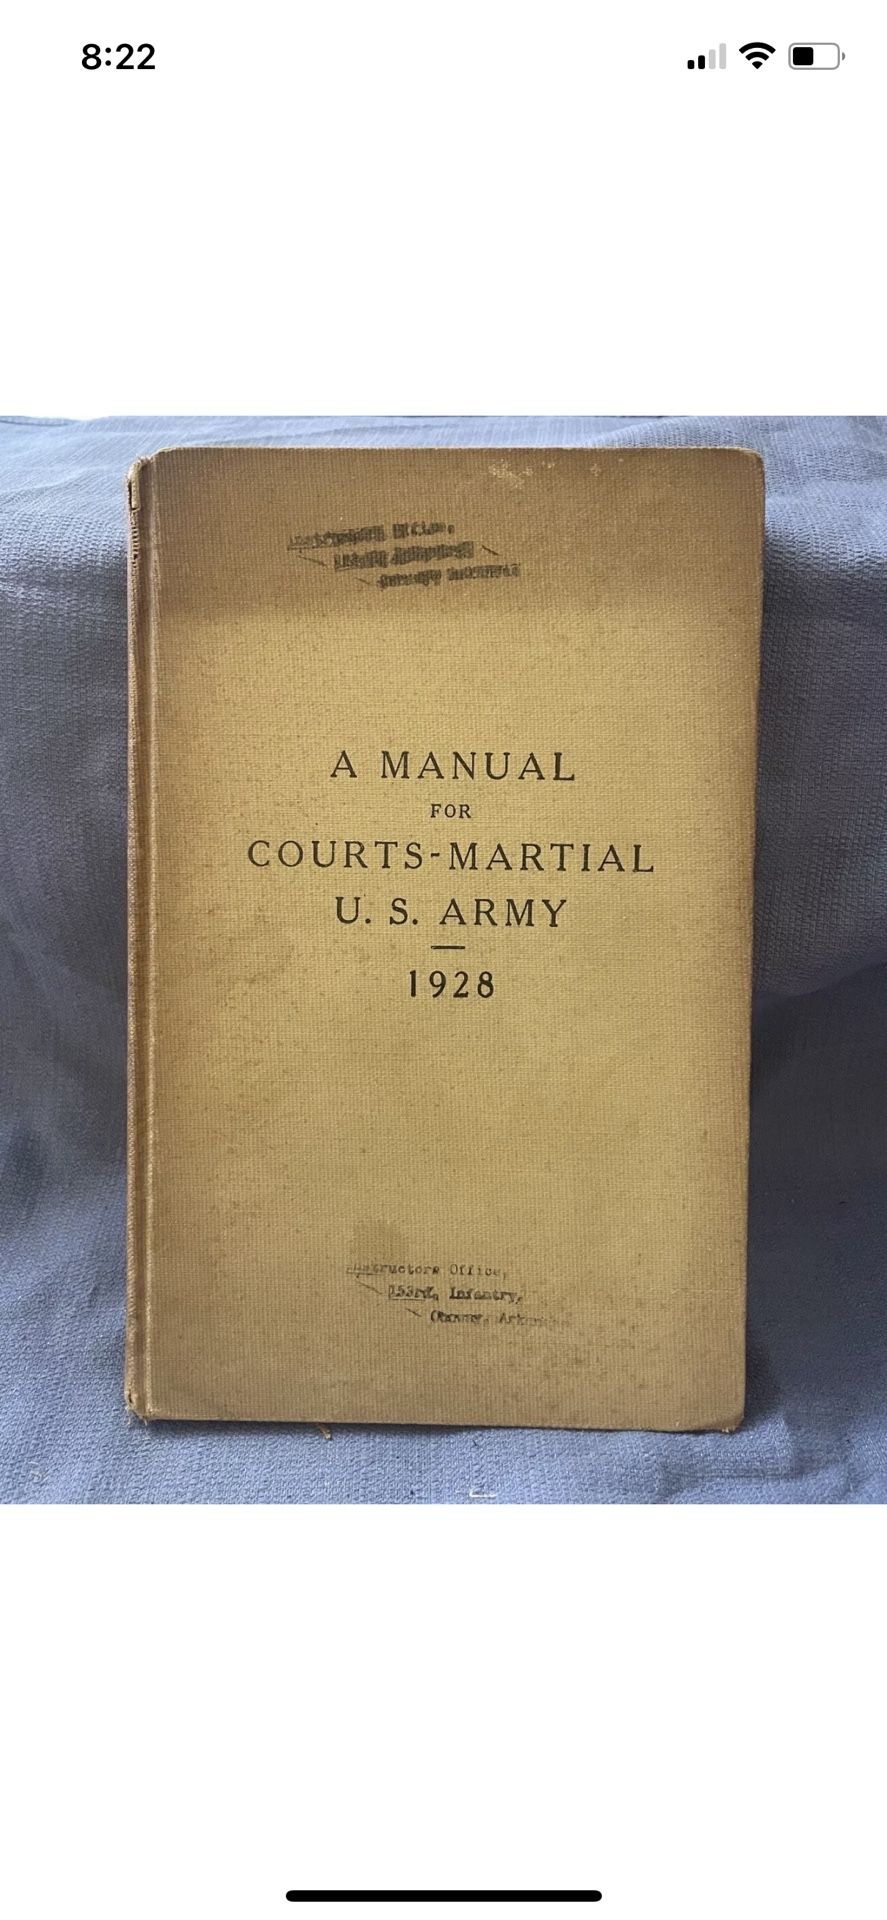 A Manual For Courts-Martial U. S. Army, 1928 Office of The JAG of The Army, HC